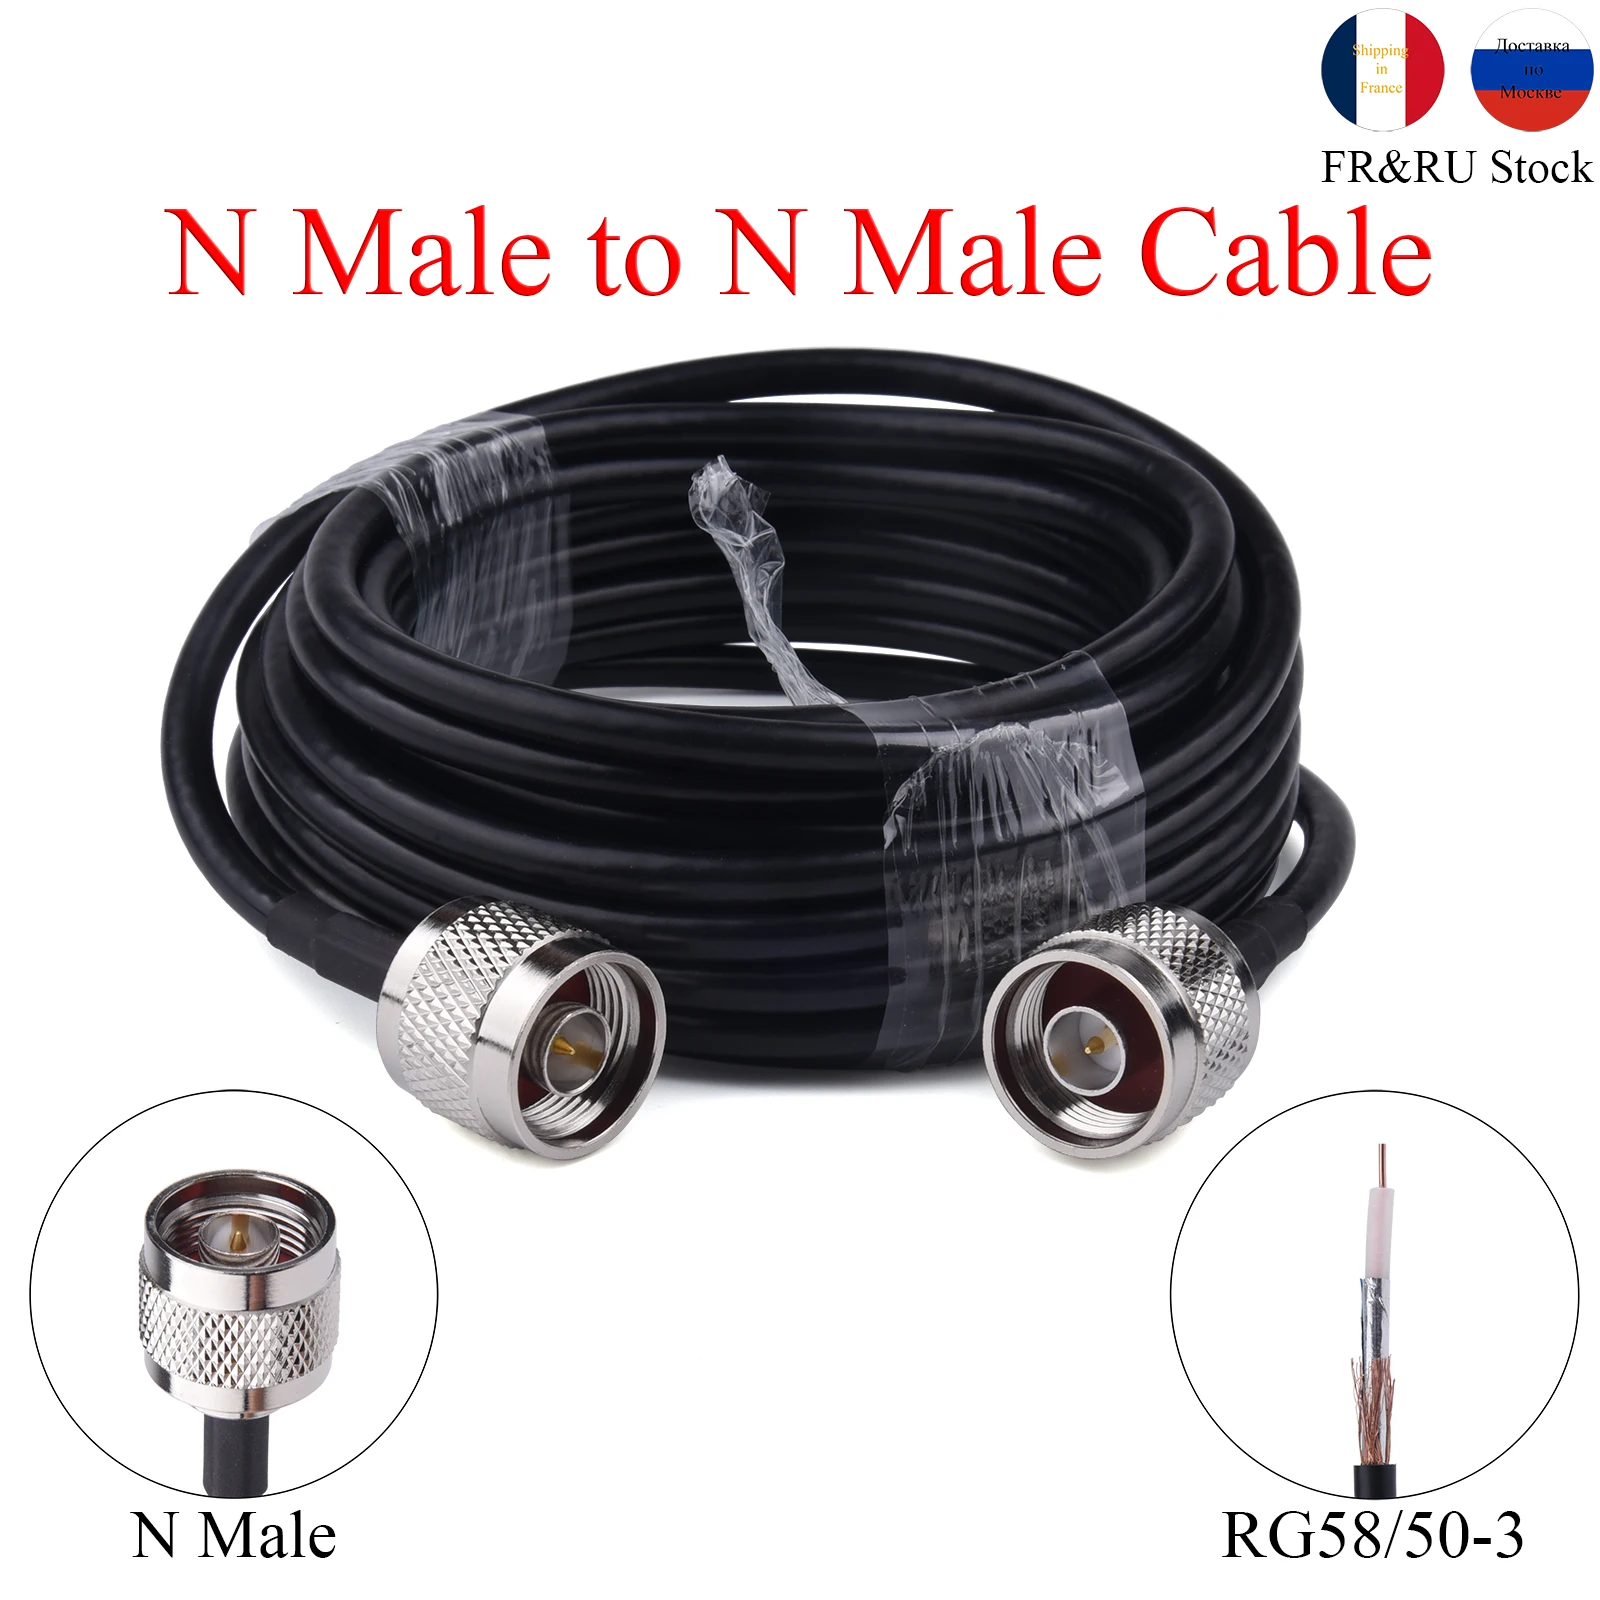 FR&RU Warehouse 1-20M RG58/50-3 RF Coaxial Cable N Male to Male Extension For 4G LTE Cellular Amplifier Signal Booster Antenna